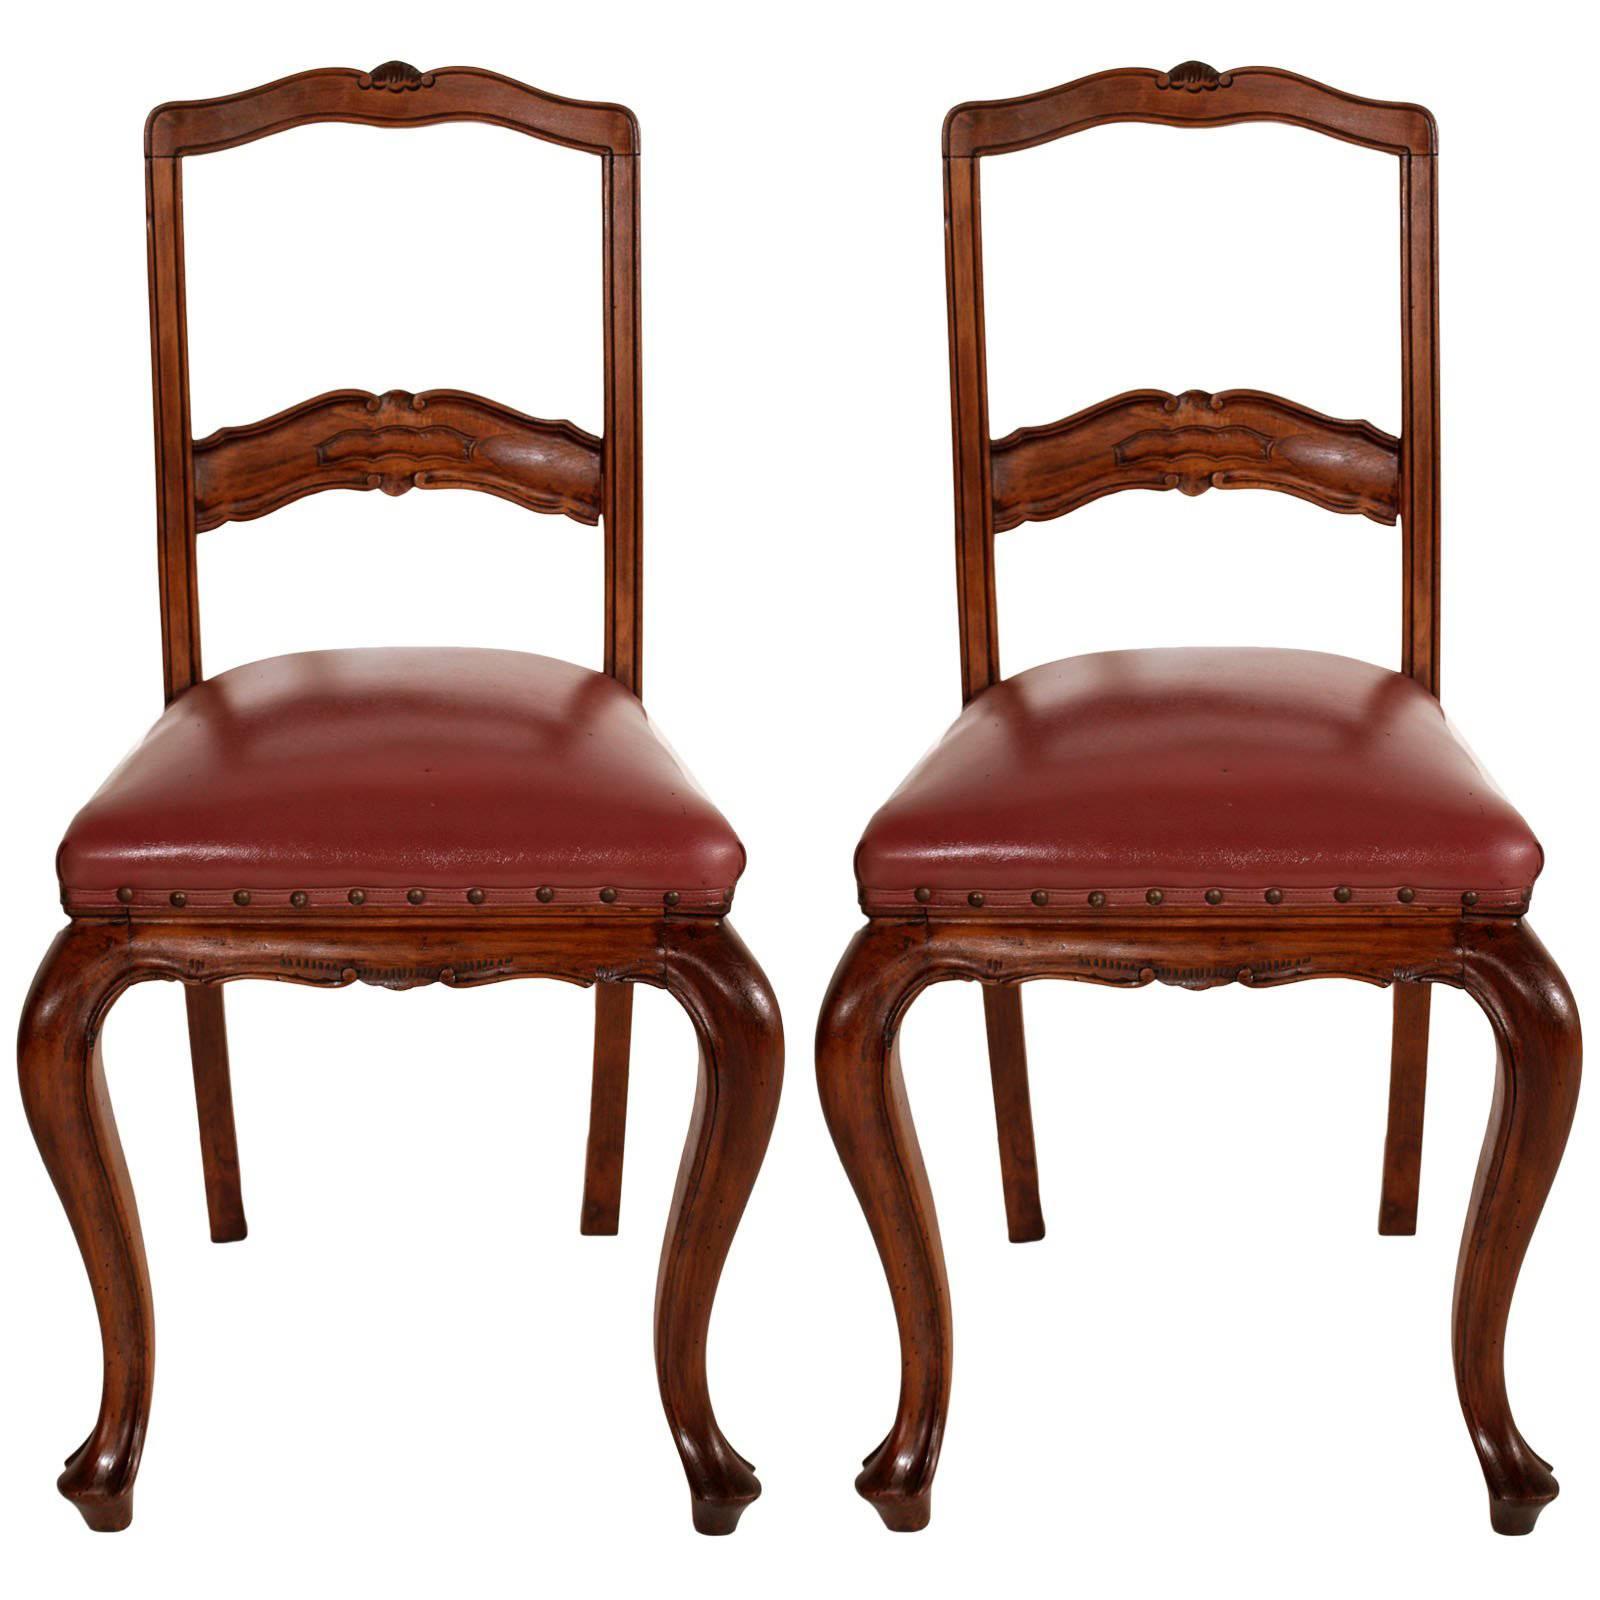 Pair Art Nouveau Neoclassical Chairs , Hand-Carved Walnut, Spring Leather Seat